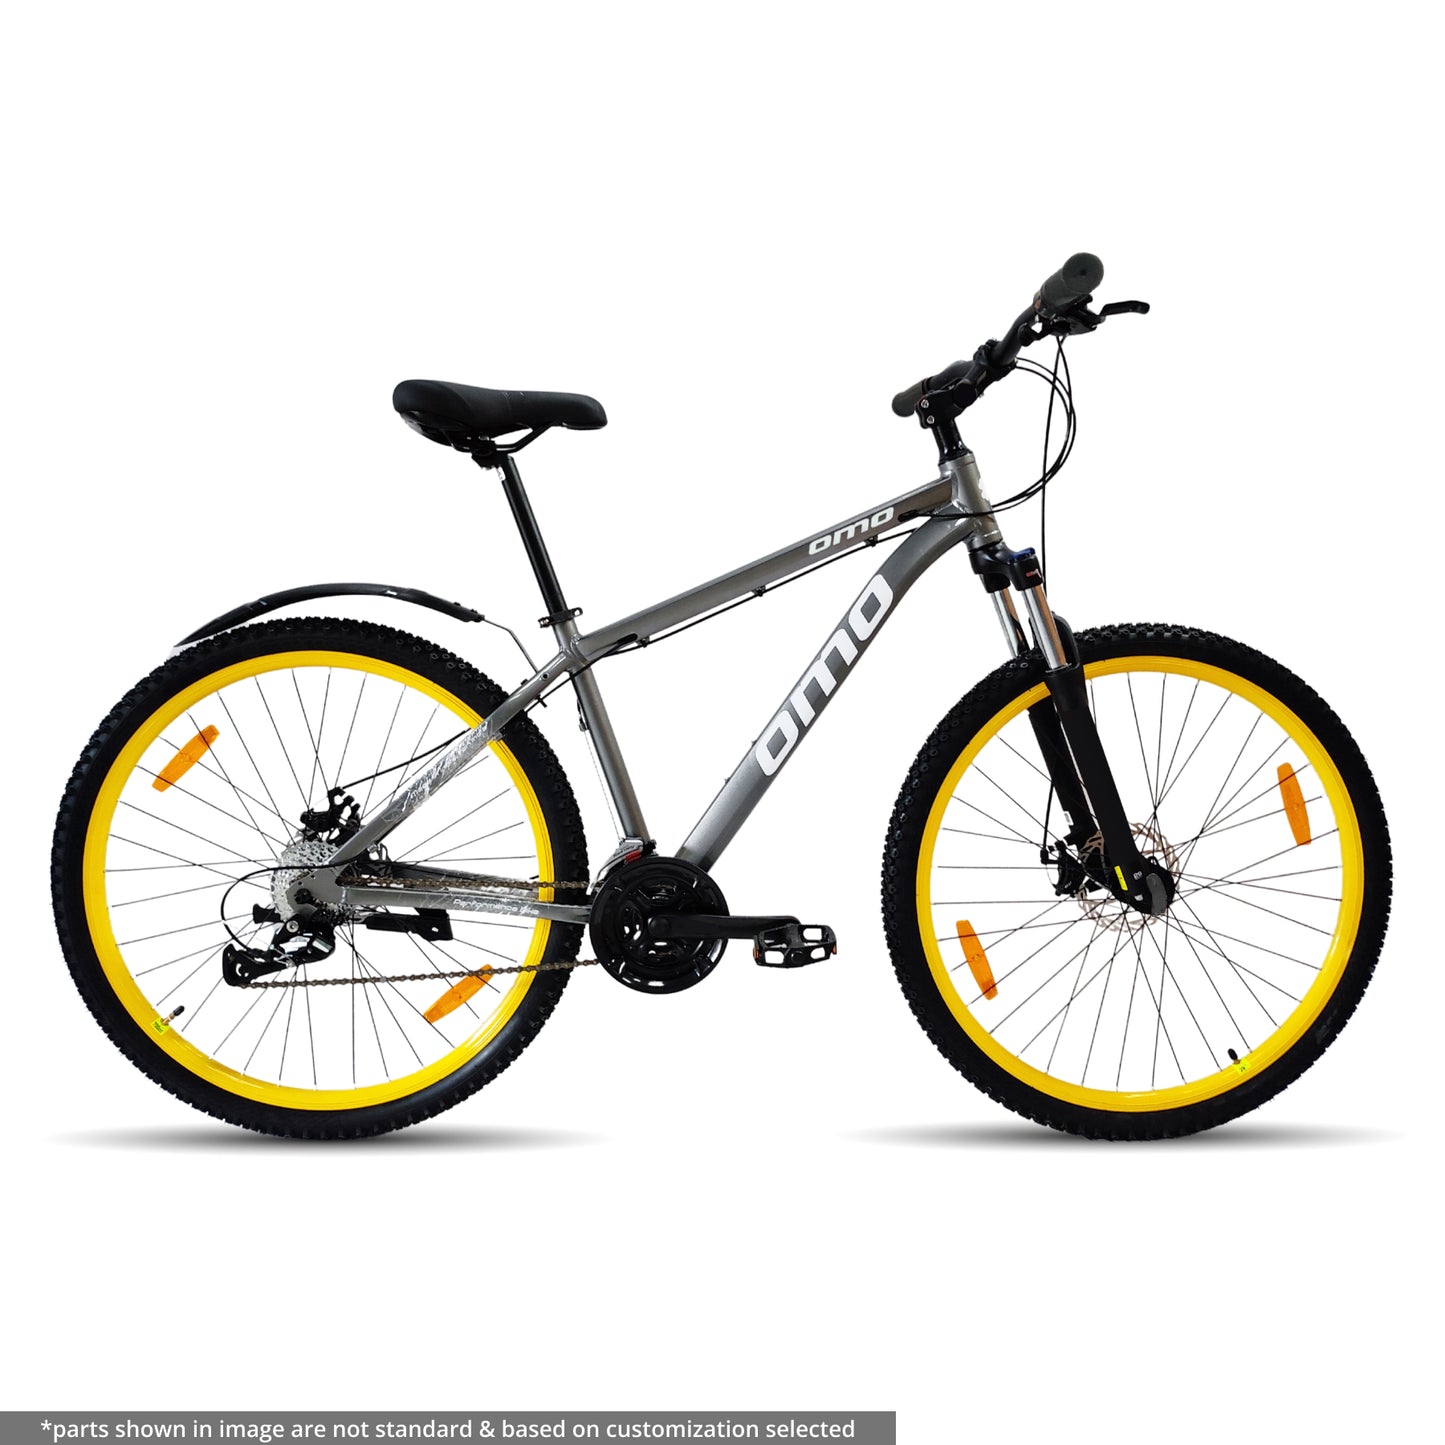 Alloy Hybrid with lockout suspension under 20000 side view grey color with yellow wheel by omobikes